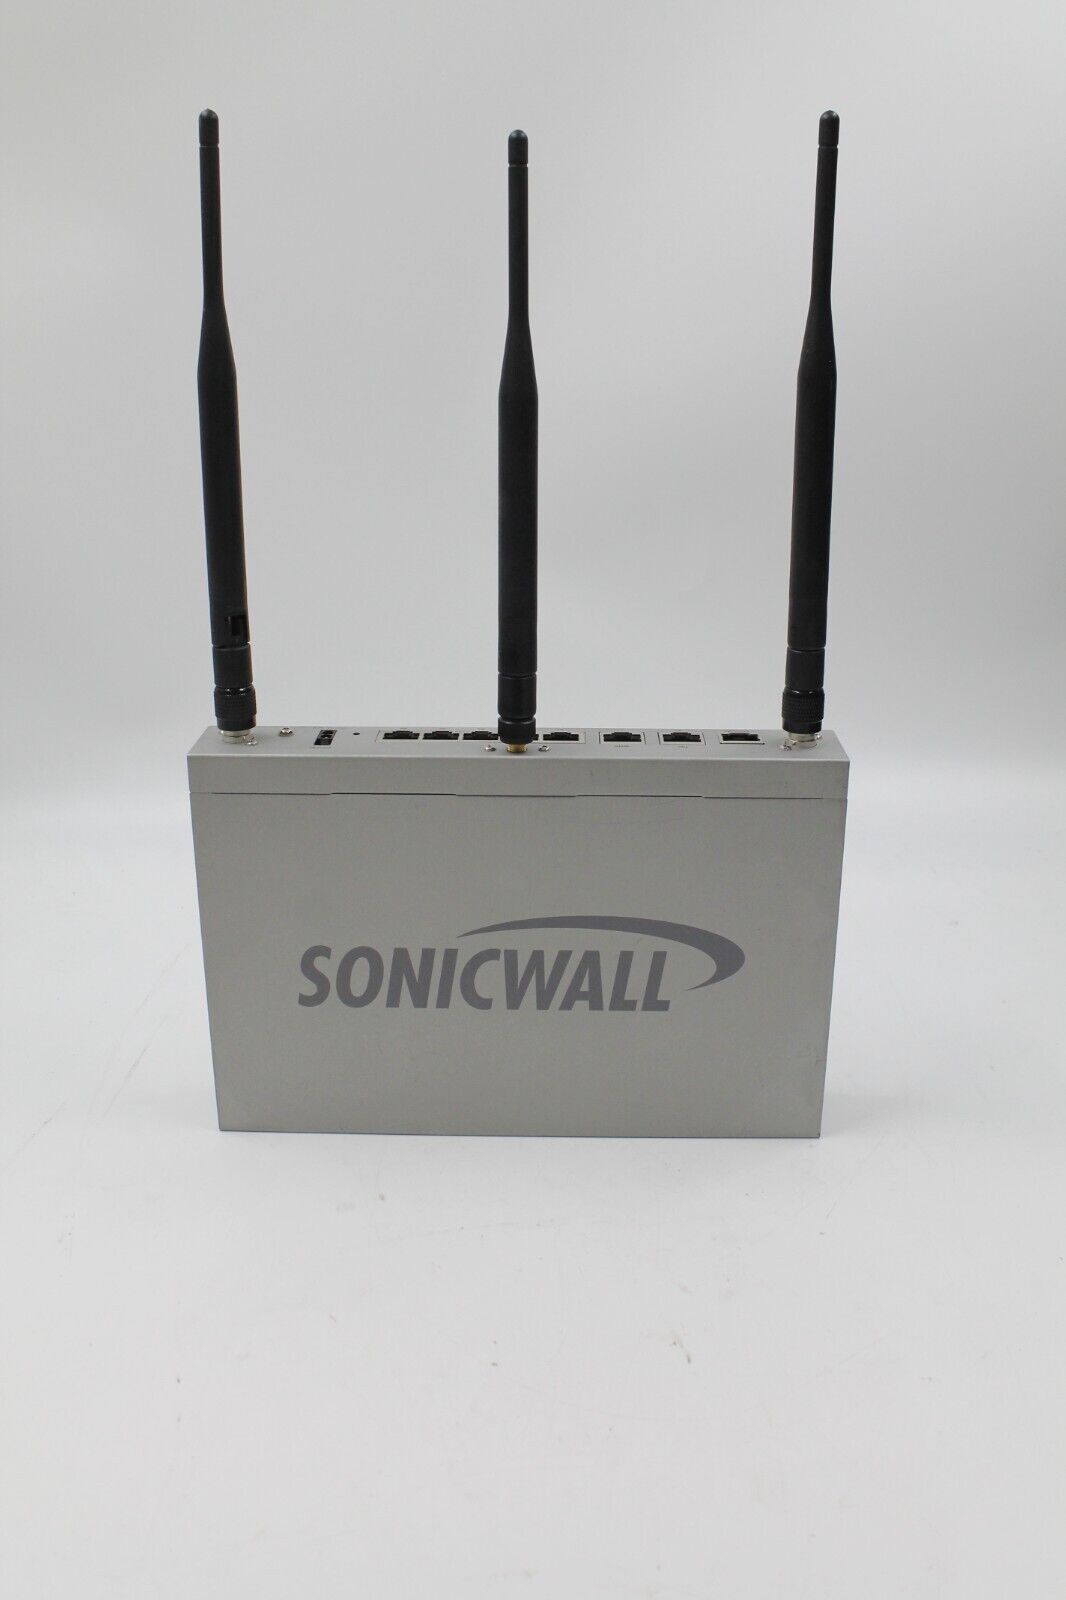 SonicWall APL24-08F NSA 220W Firewall Network Security Appliance 